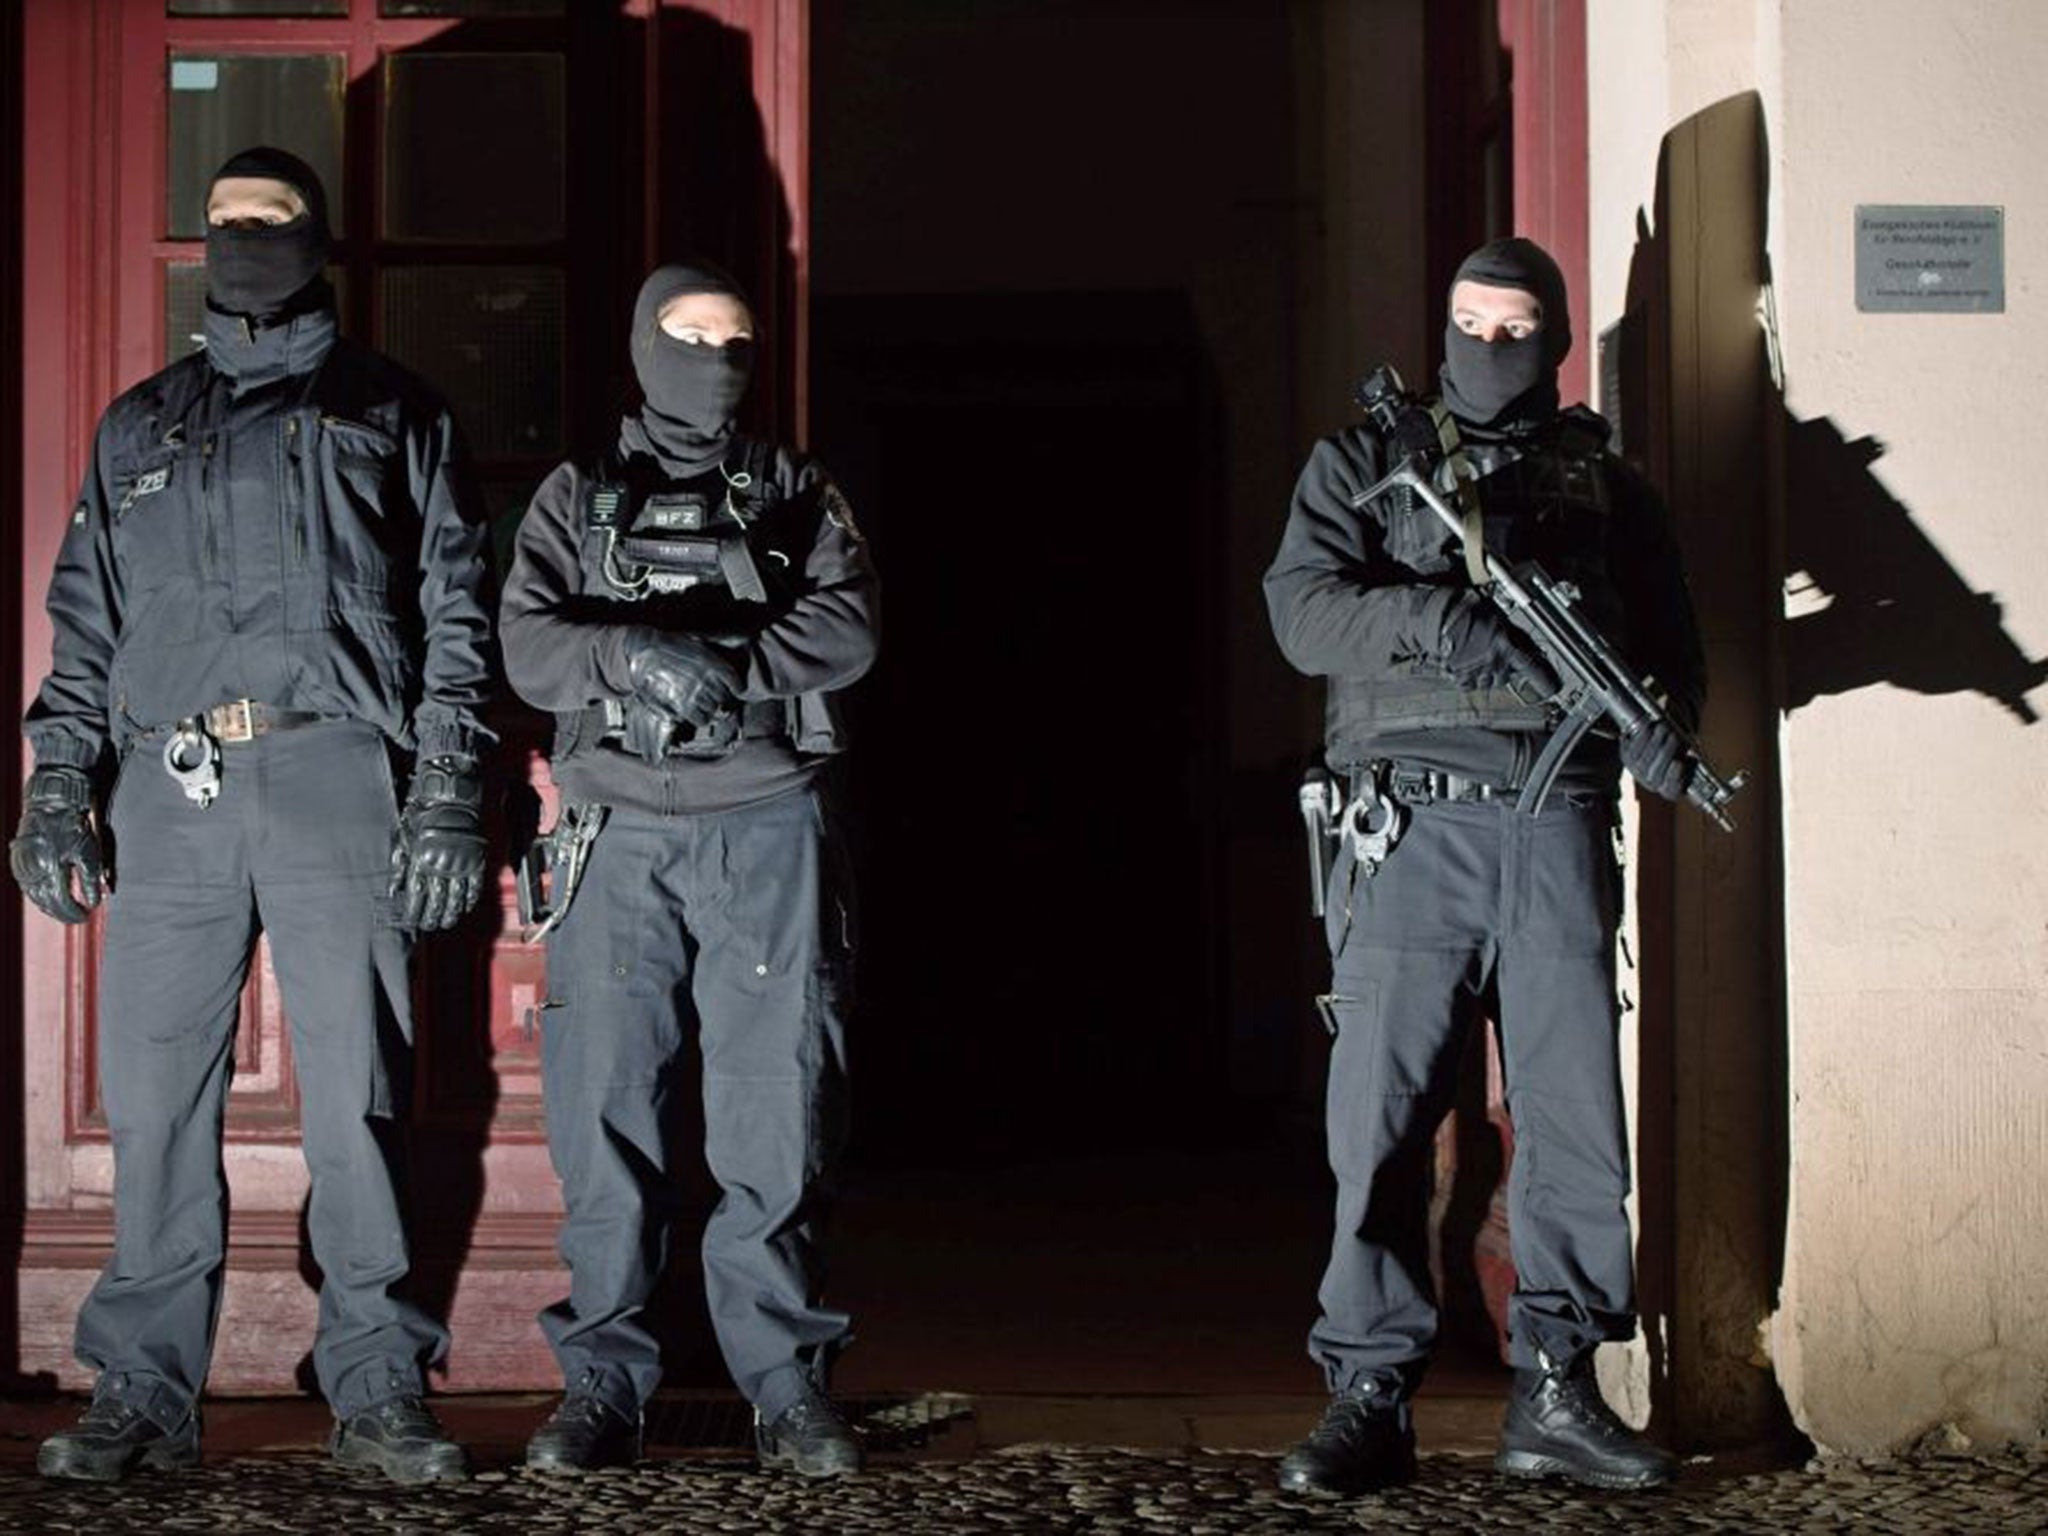 Members of a special German anti-terror police outside an apartment block in Perleberger Strasse, Berlin, 16 January 2015.